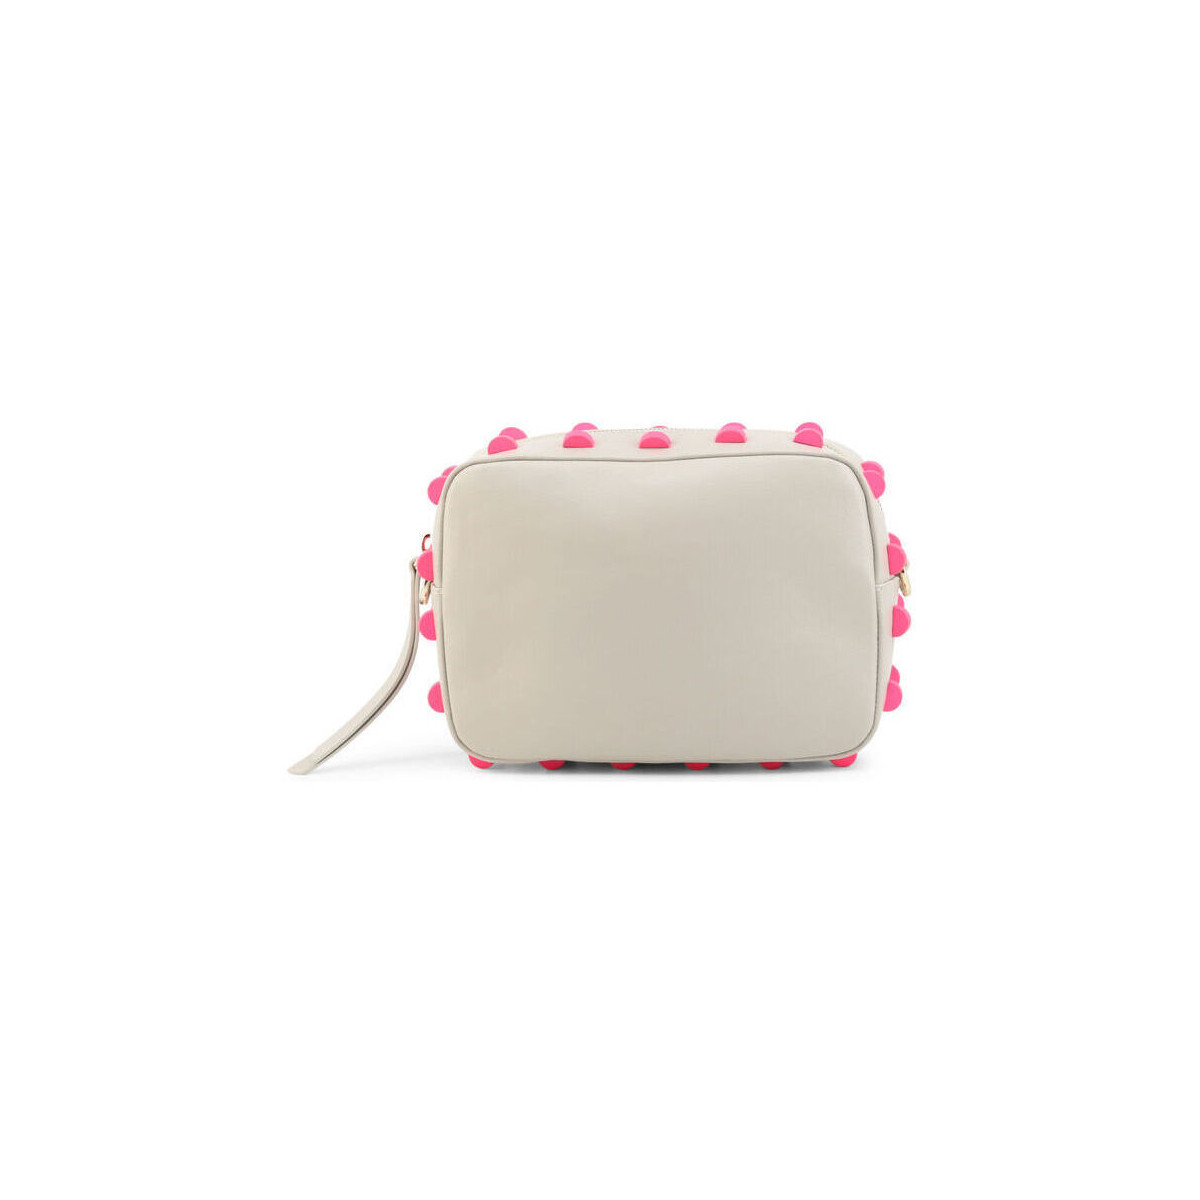 Pouch/Clutch Borbonese - 954746-400